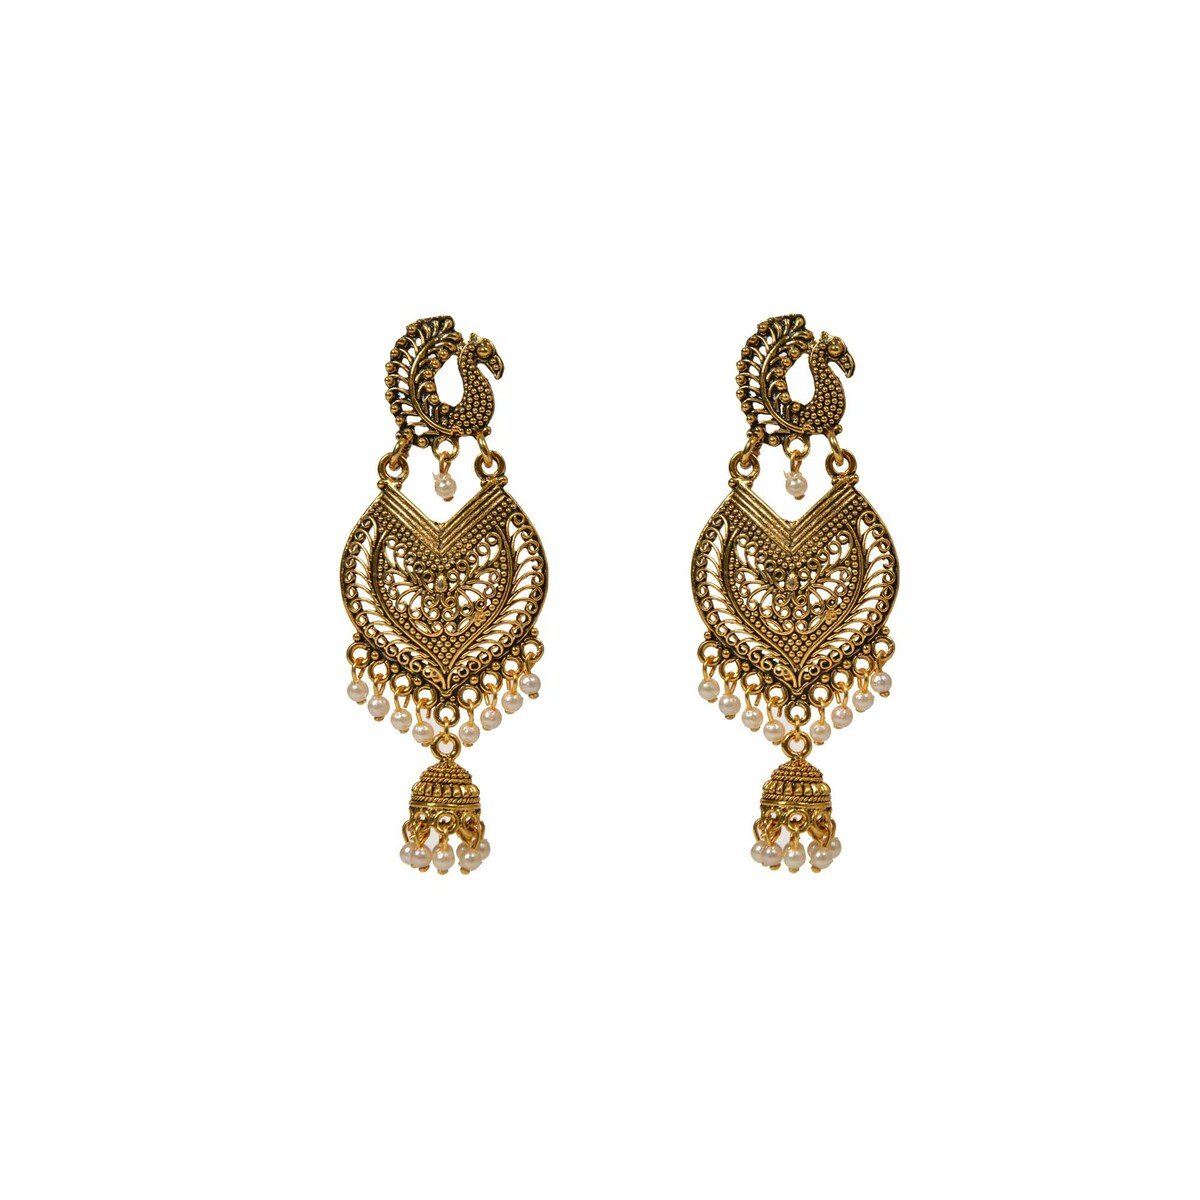 Eten Traditional Ethnic Earrings Antique Oxidized Gold Color WB026